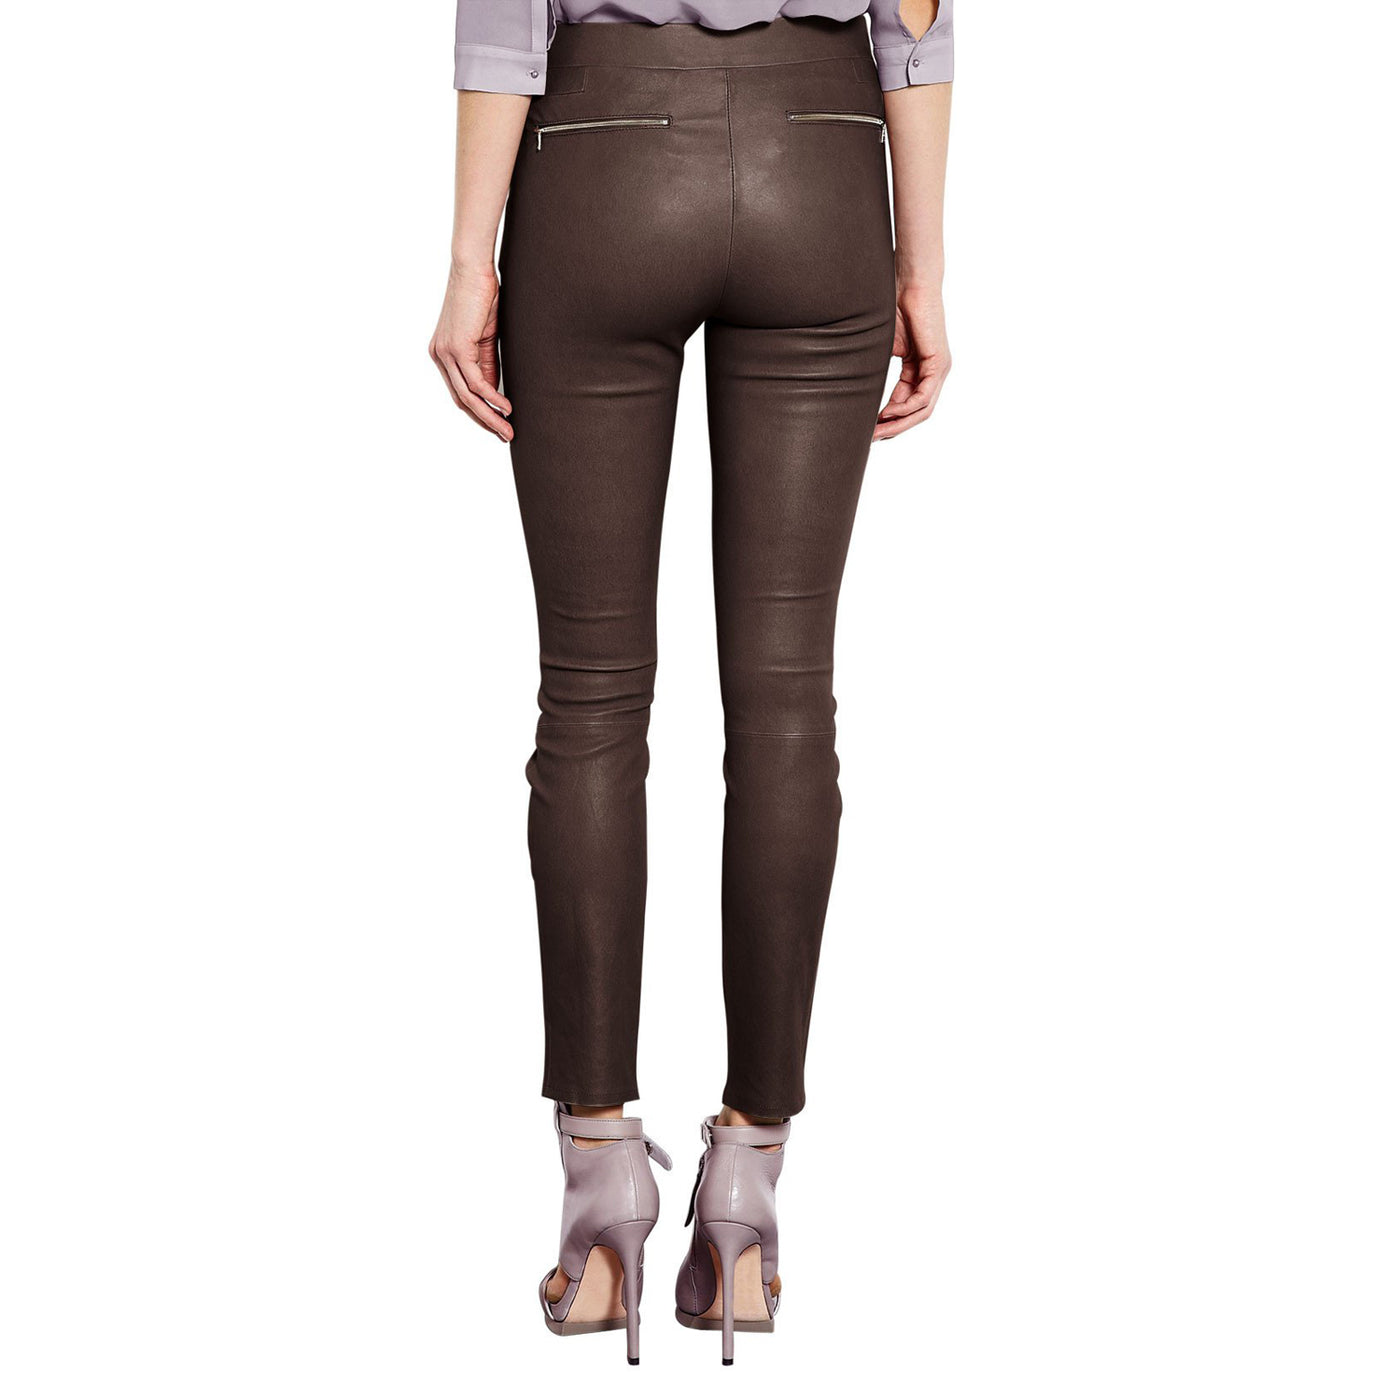 Brown leather pants (style #7) - Lusso Leather - 2